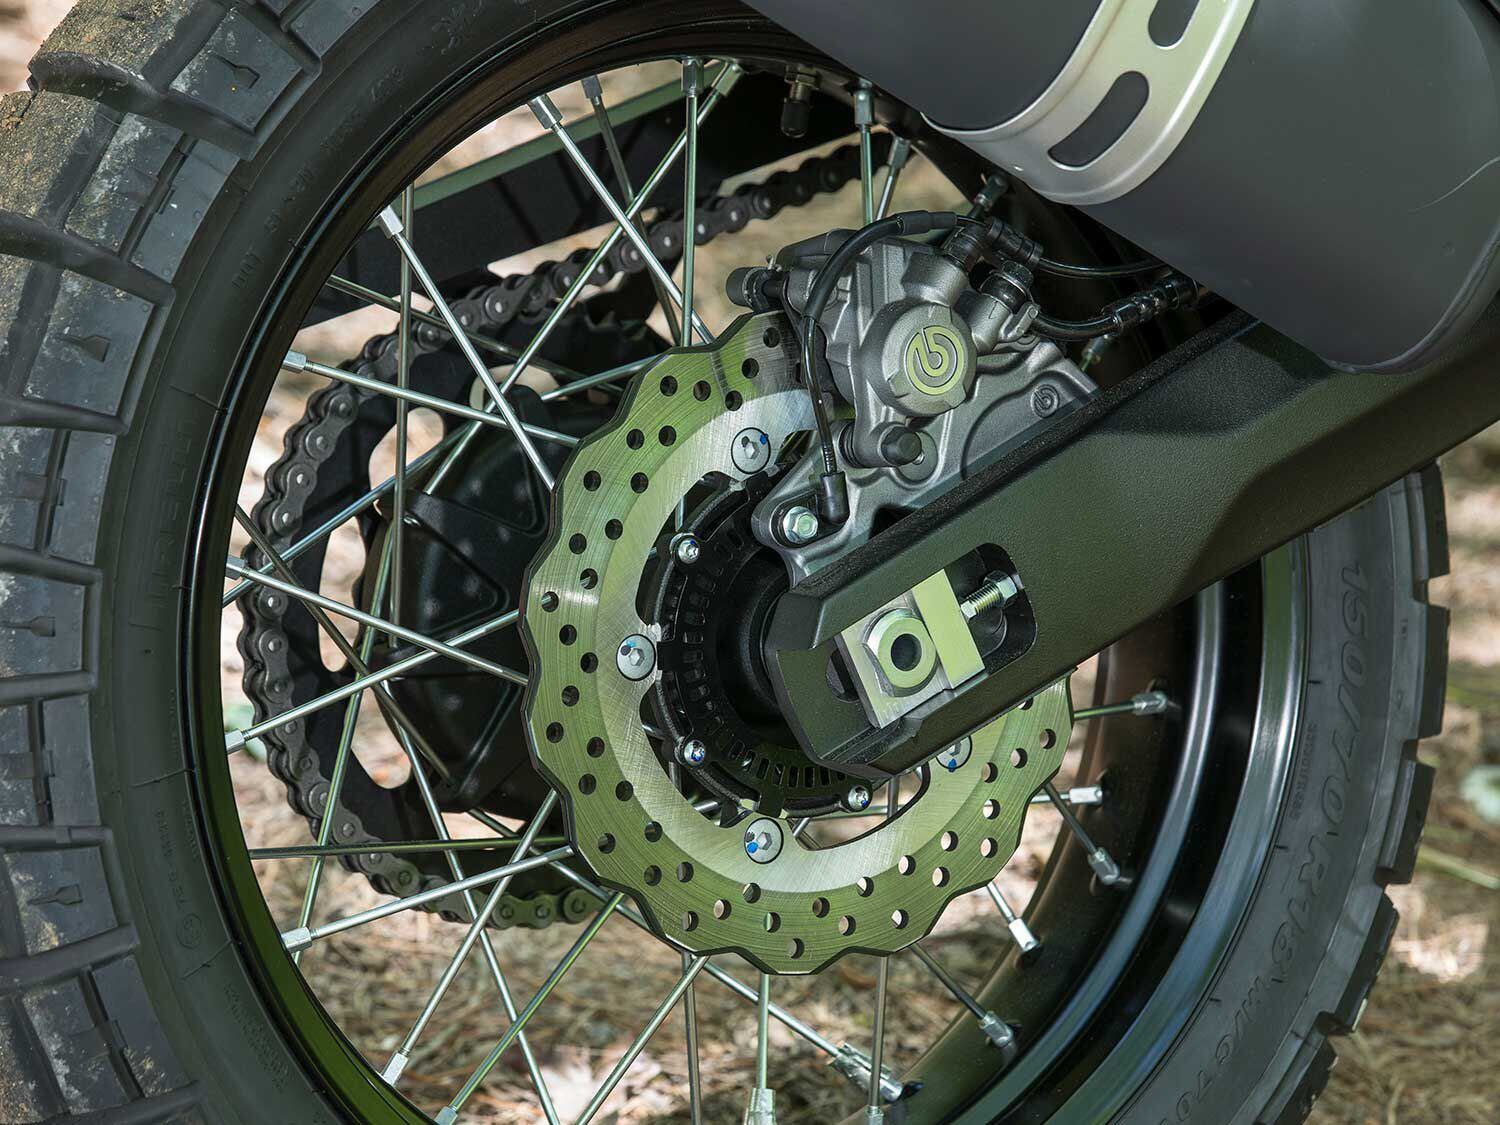 Although the rear brake has a pleasing degree of power, feel and the pedal could be improved.